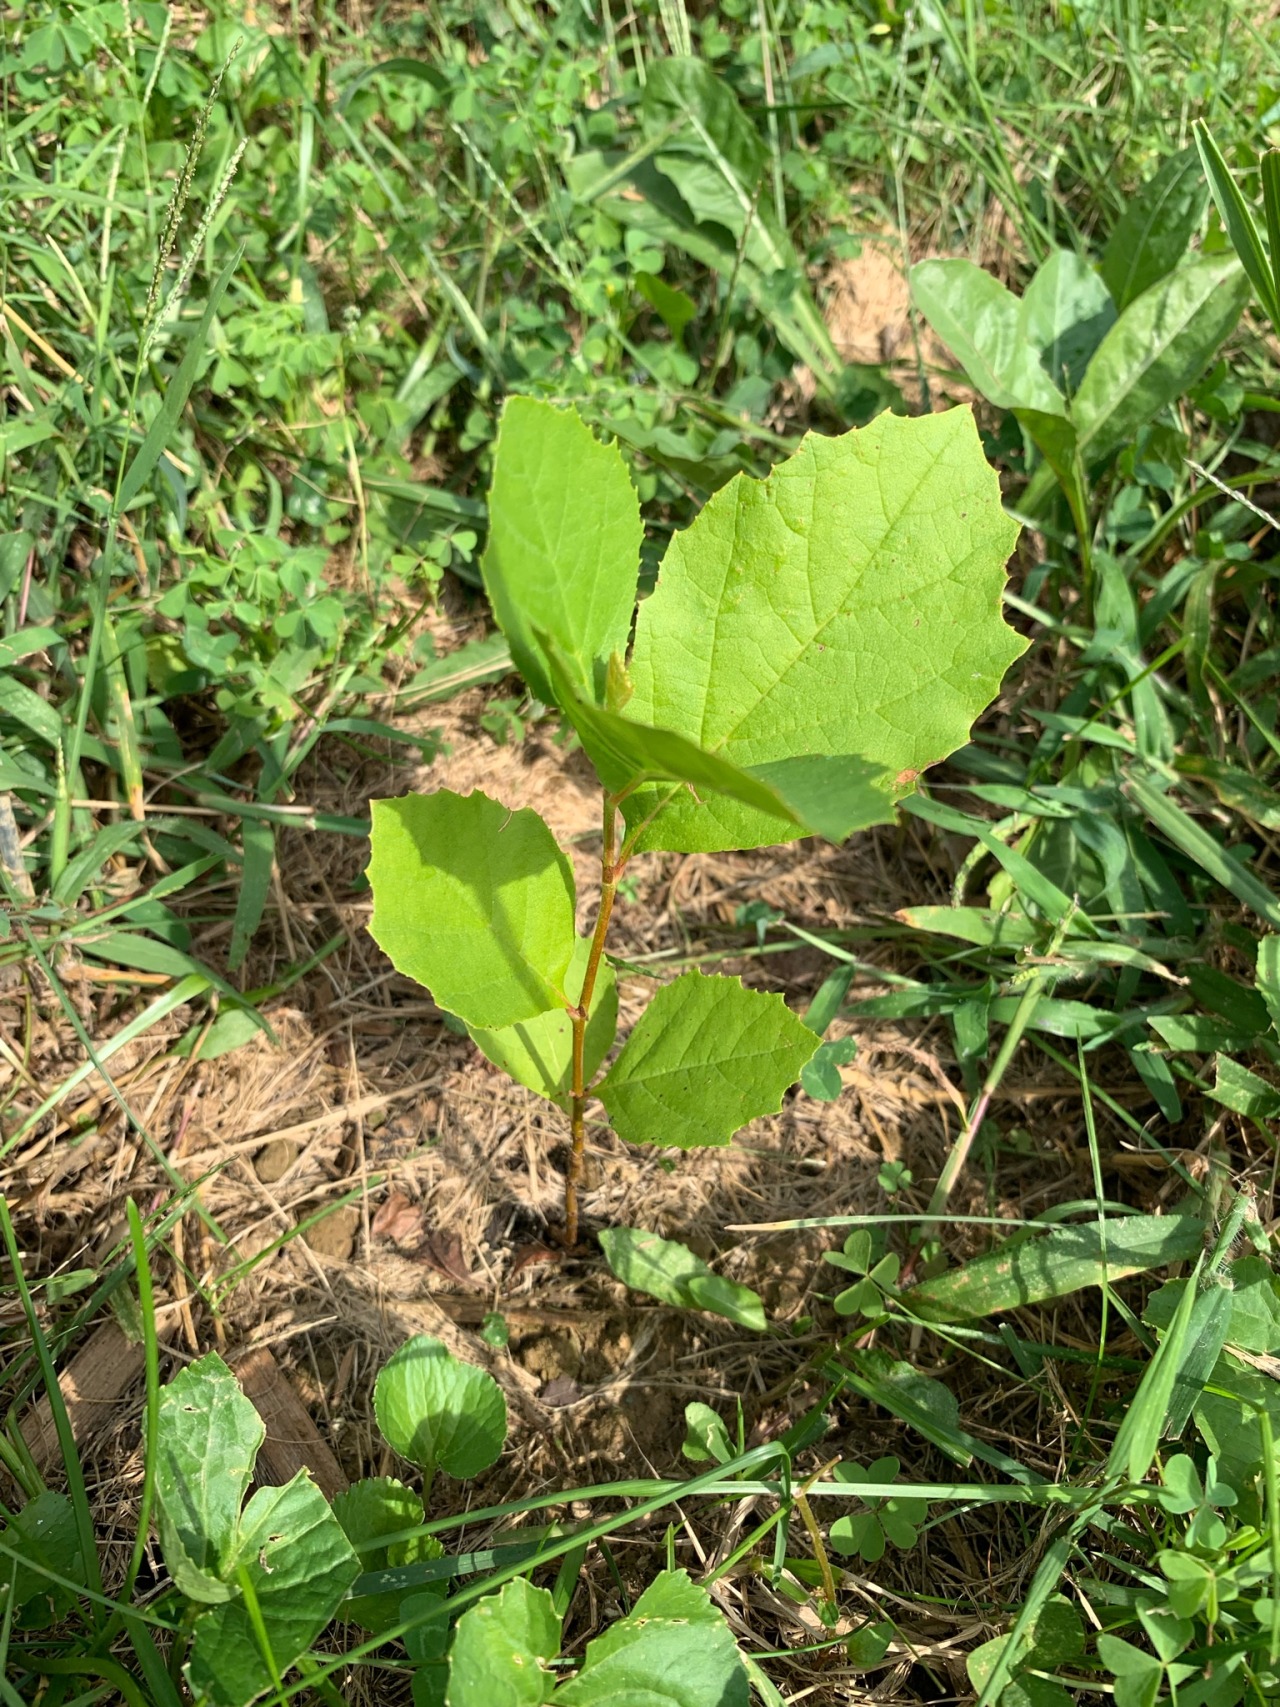 headspace-hotel:headspace-hotel:headspace-hotel:so proud of this little guy SHE INCREASETH! It’s been a harsh, dry summer with hardly a drop of rain, and you had such a rough start in life, sprouting in a gravel parking lot and being transplanted